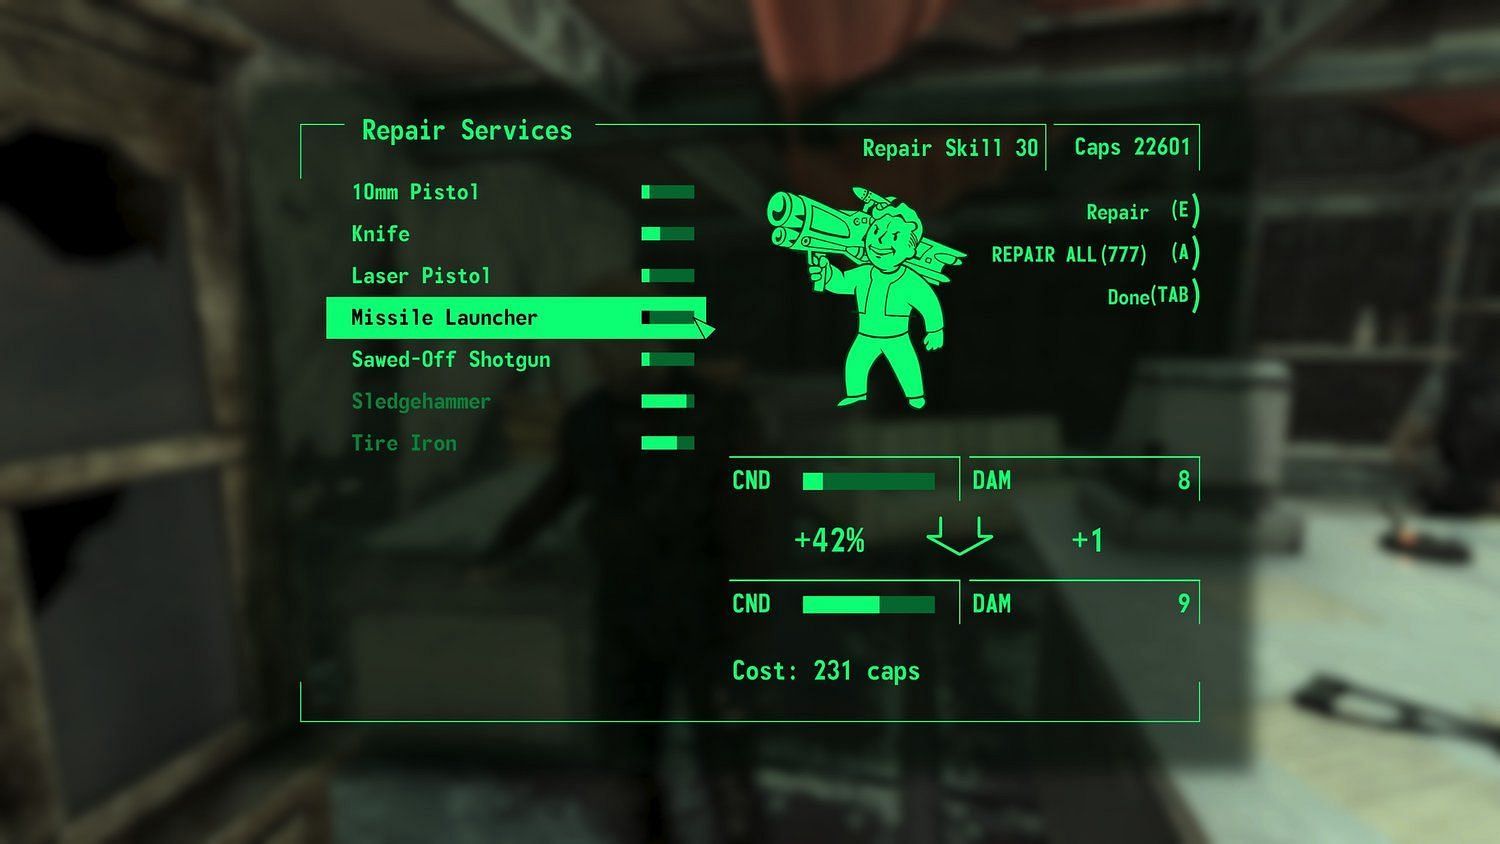 Ambitious Fallout 3 Remake 'Capital Wasteland' Has Been Cancelled 